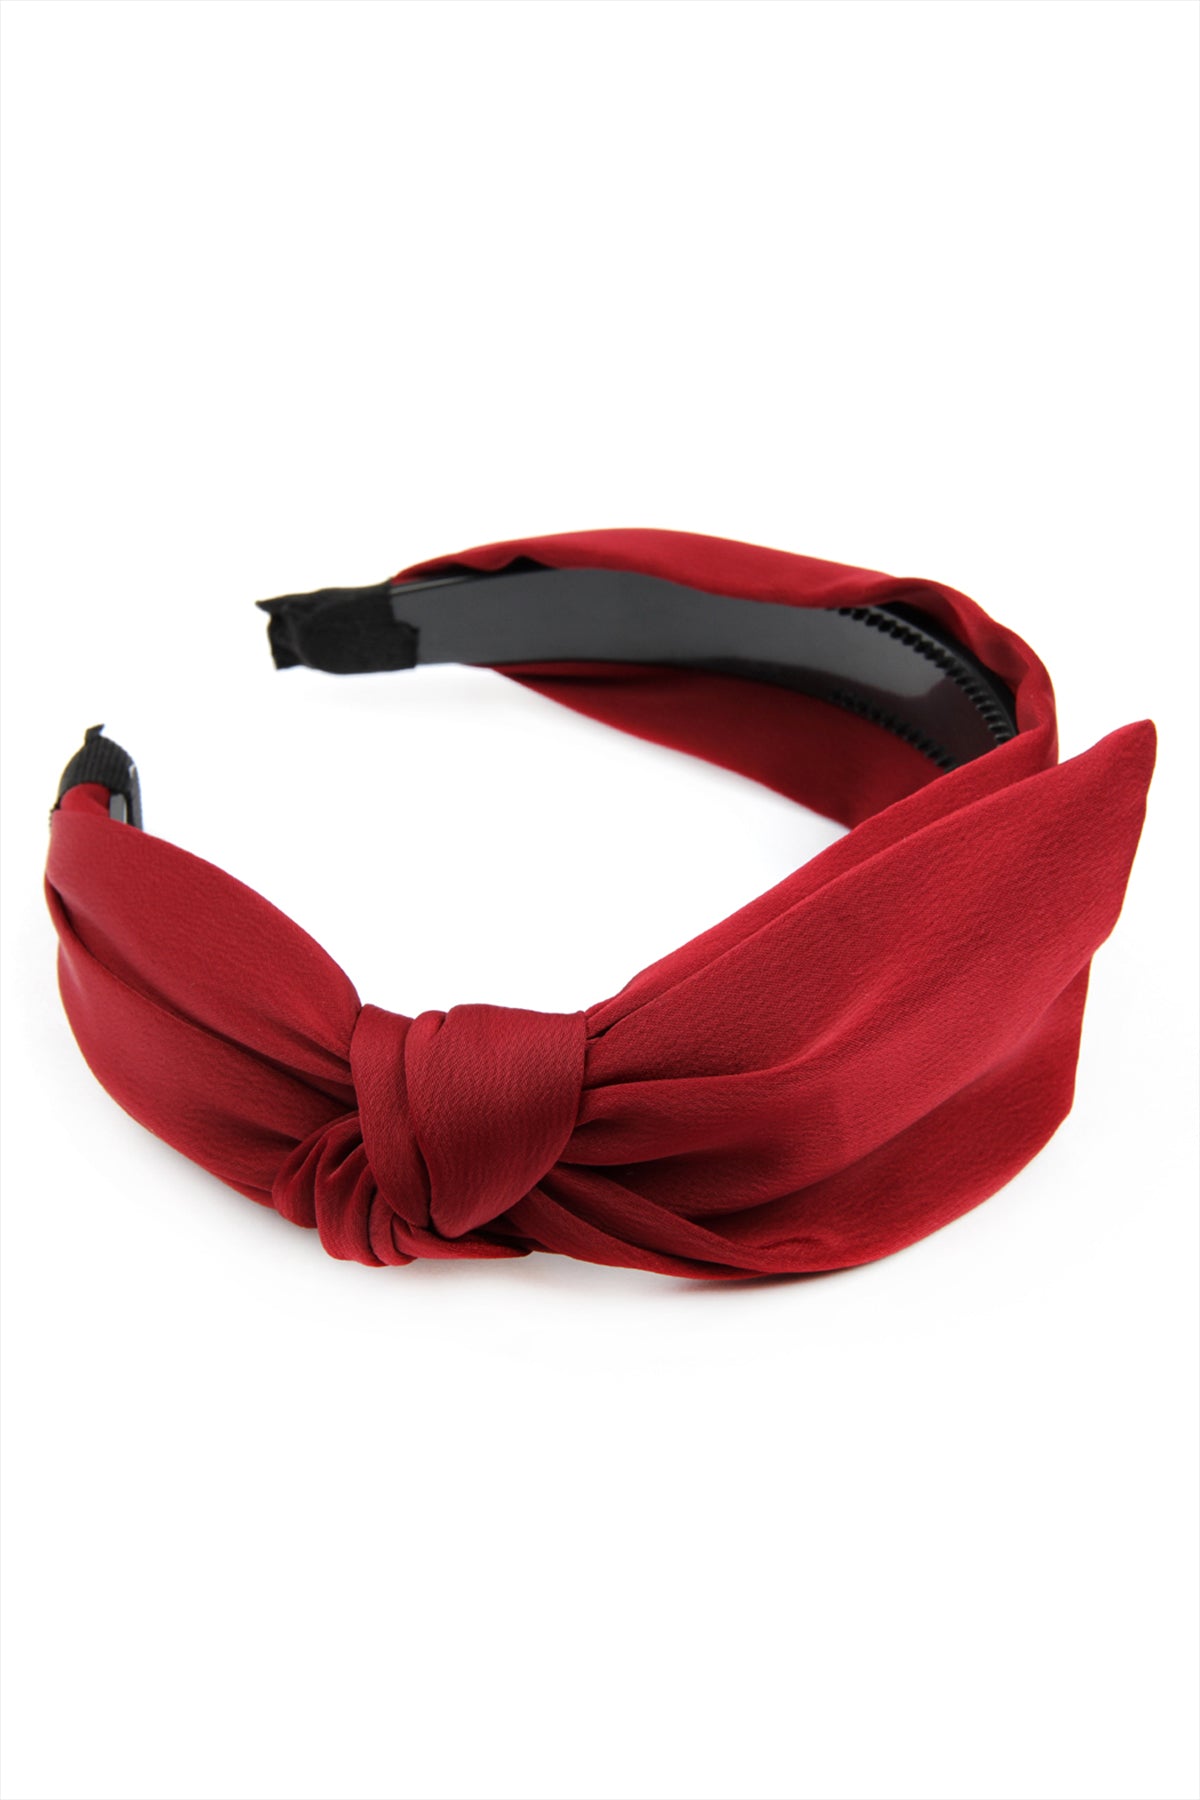 KNOTTED CLOTHED HAIR BAND/6PCS (NOW $1.00 ONLY!)